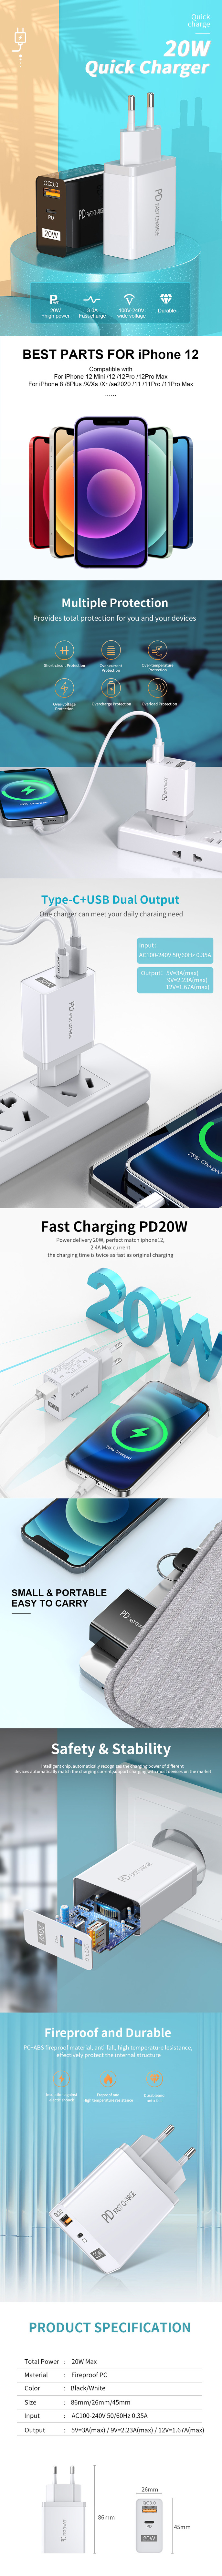 USLION-20W-QC30-PD-USB-Charger-USB-C-PD30-QC30-Fast-Charging-Wall-Charger-Adapter-EUUS-Plug-For-iPho-1906155-1